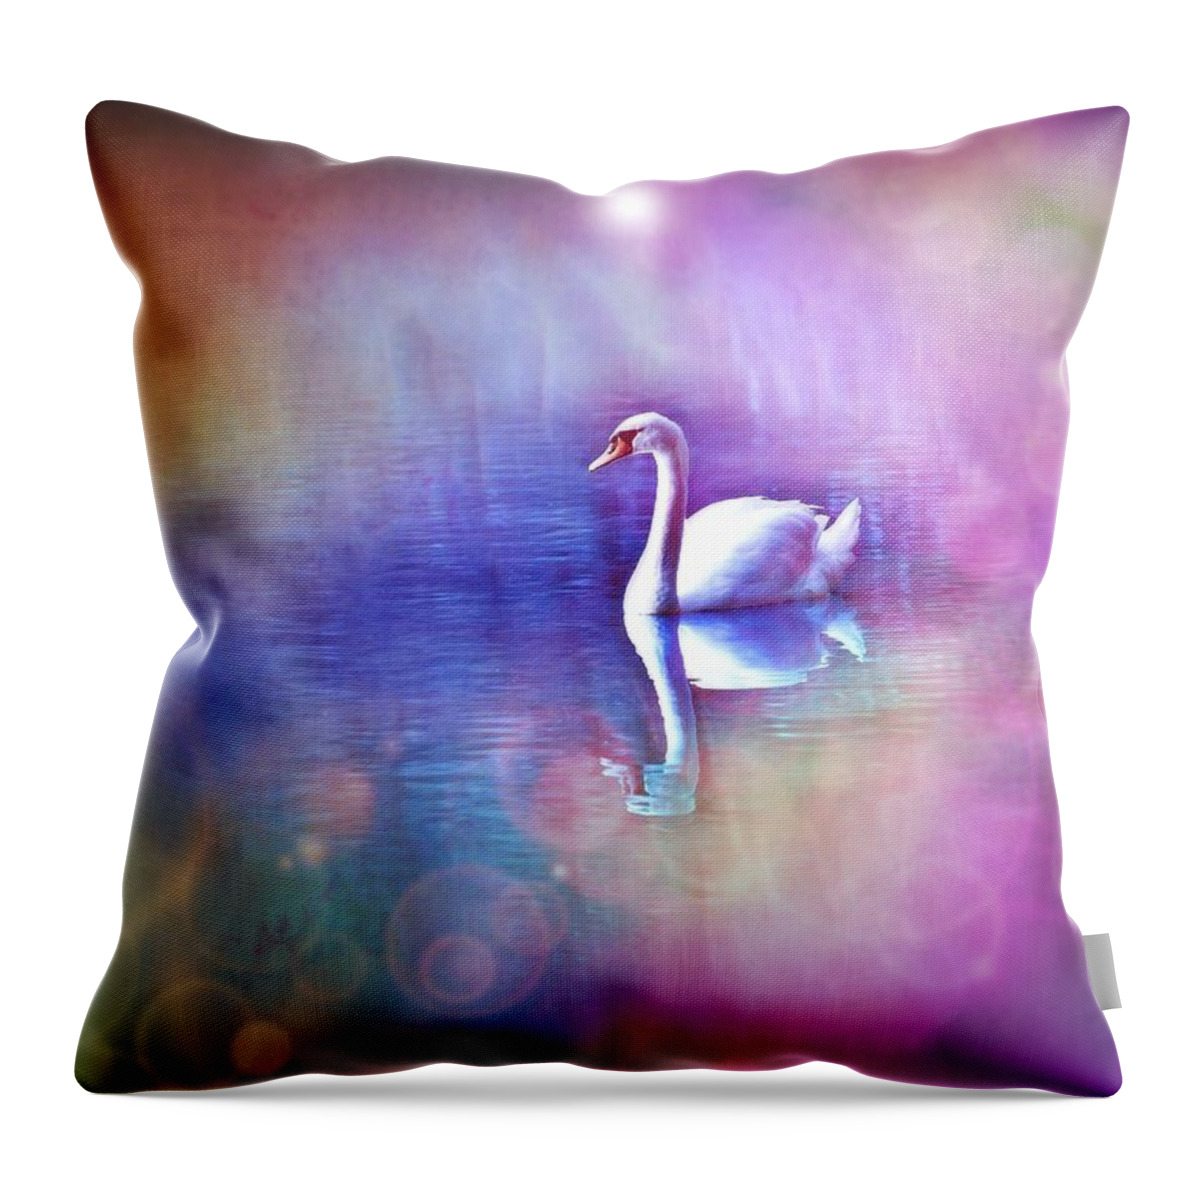 White Swan Throw Pillow featuring the digital art White Swan in colorful fog by Lilia S